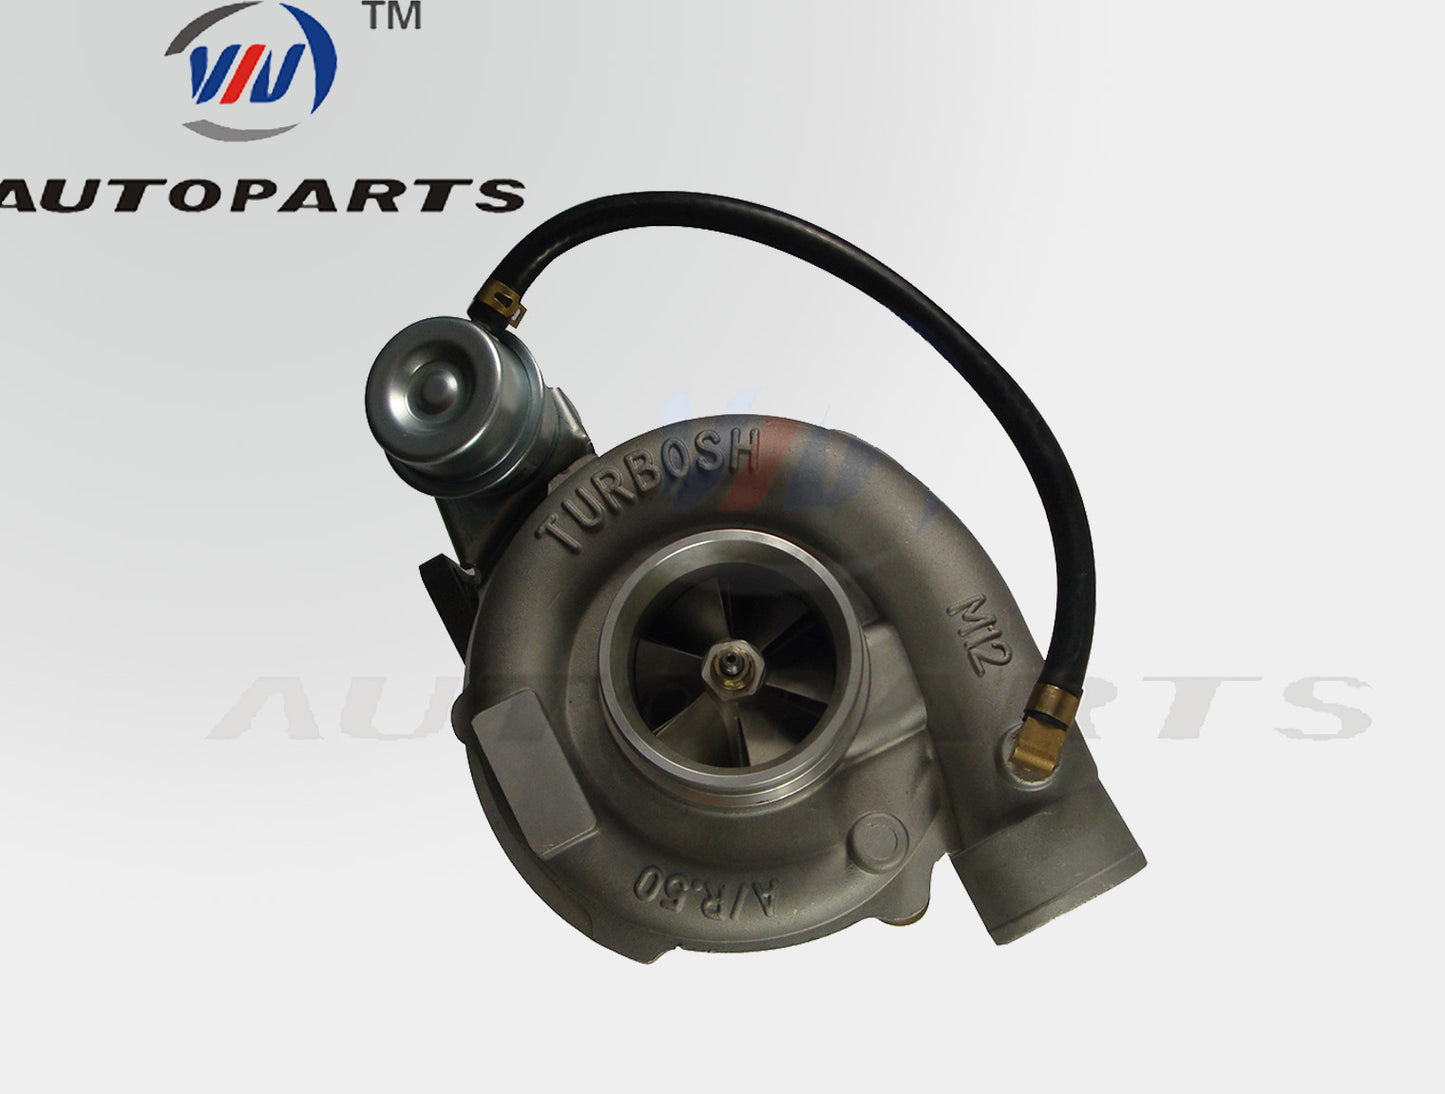 GT3540 GT3582 Upgrade billet A/R.50 A/R 1.06 5 bolt Water Cool Turbo Charger for 400-600hp